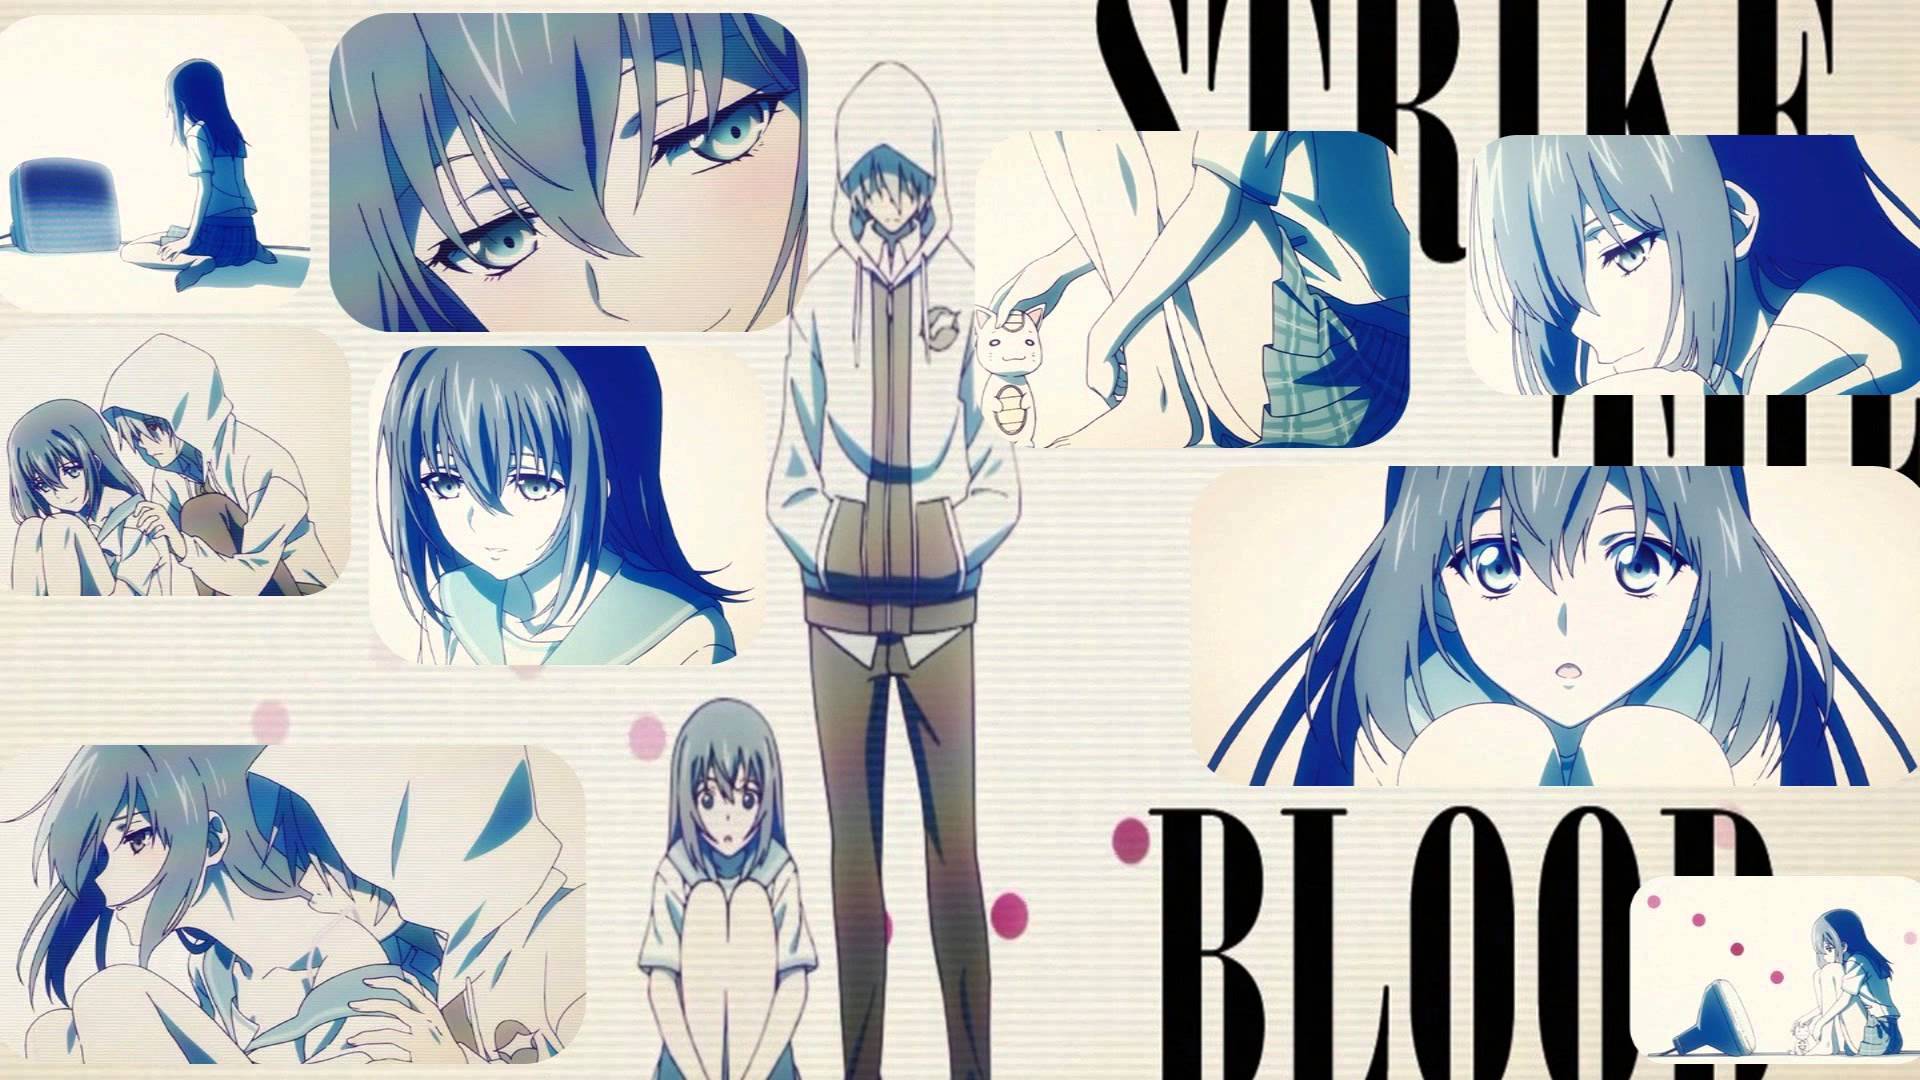 Anime Strike the Blood HD Wallpaper | Background Image